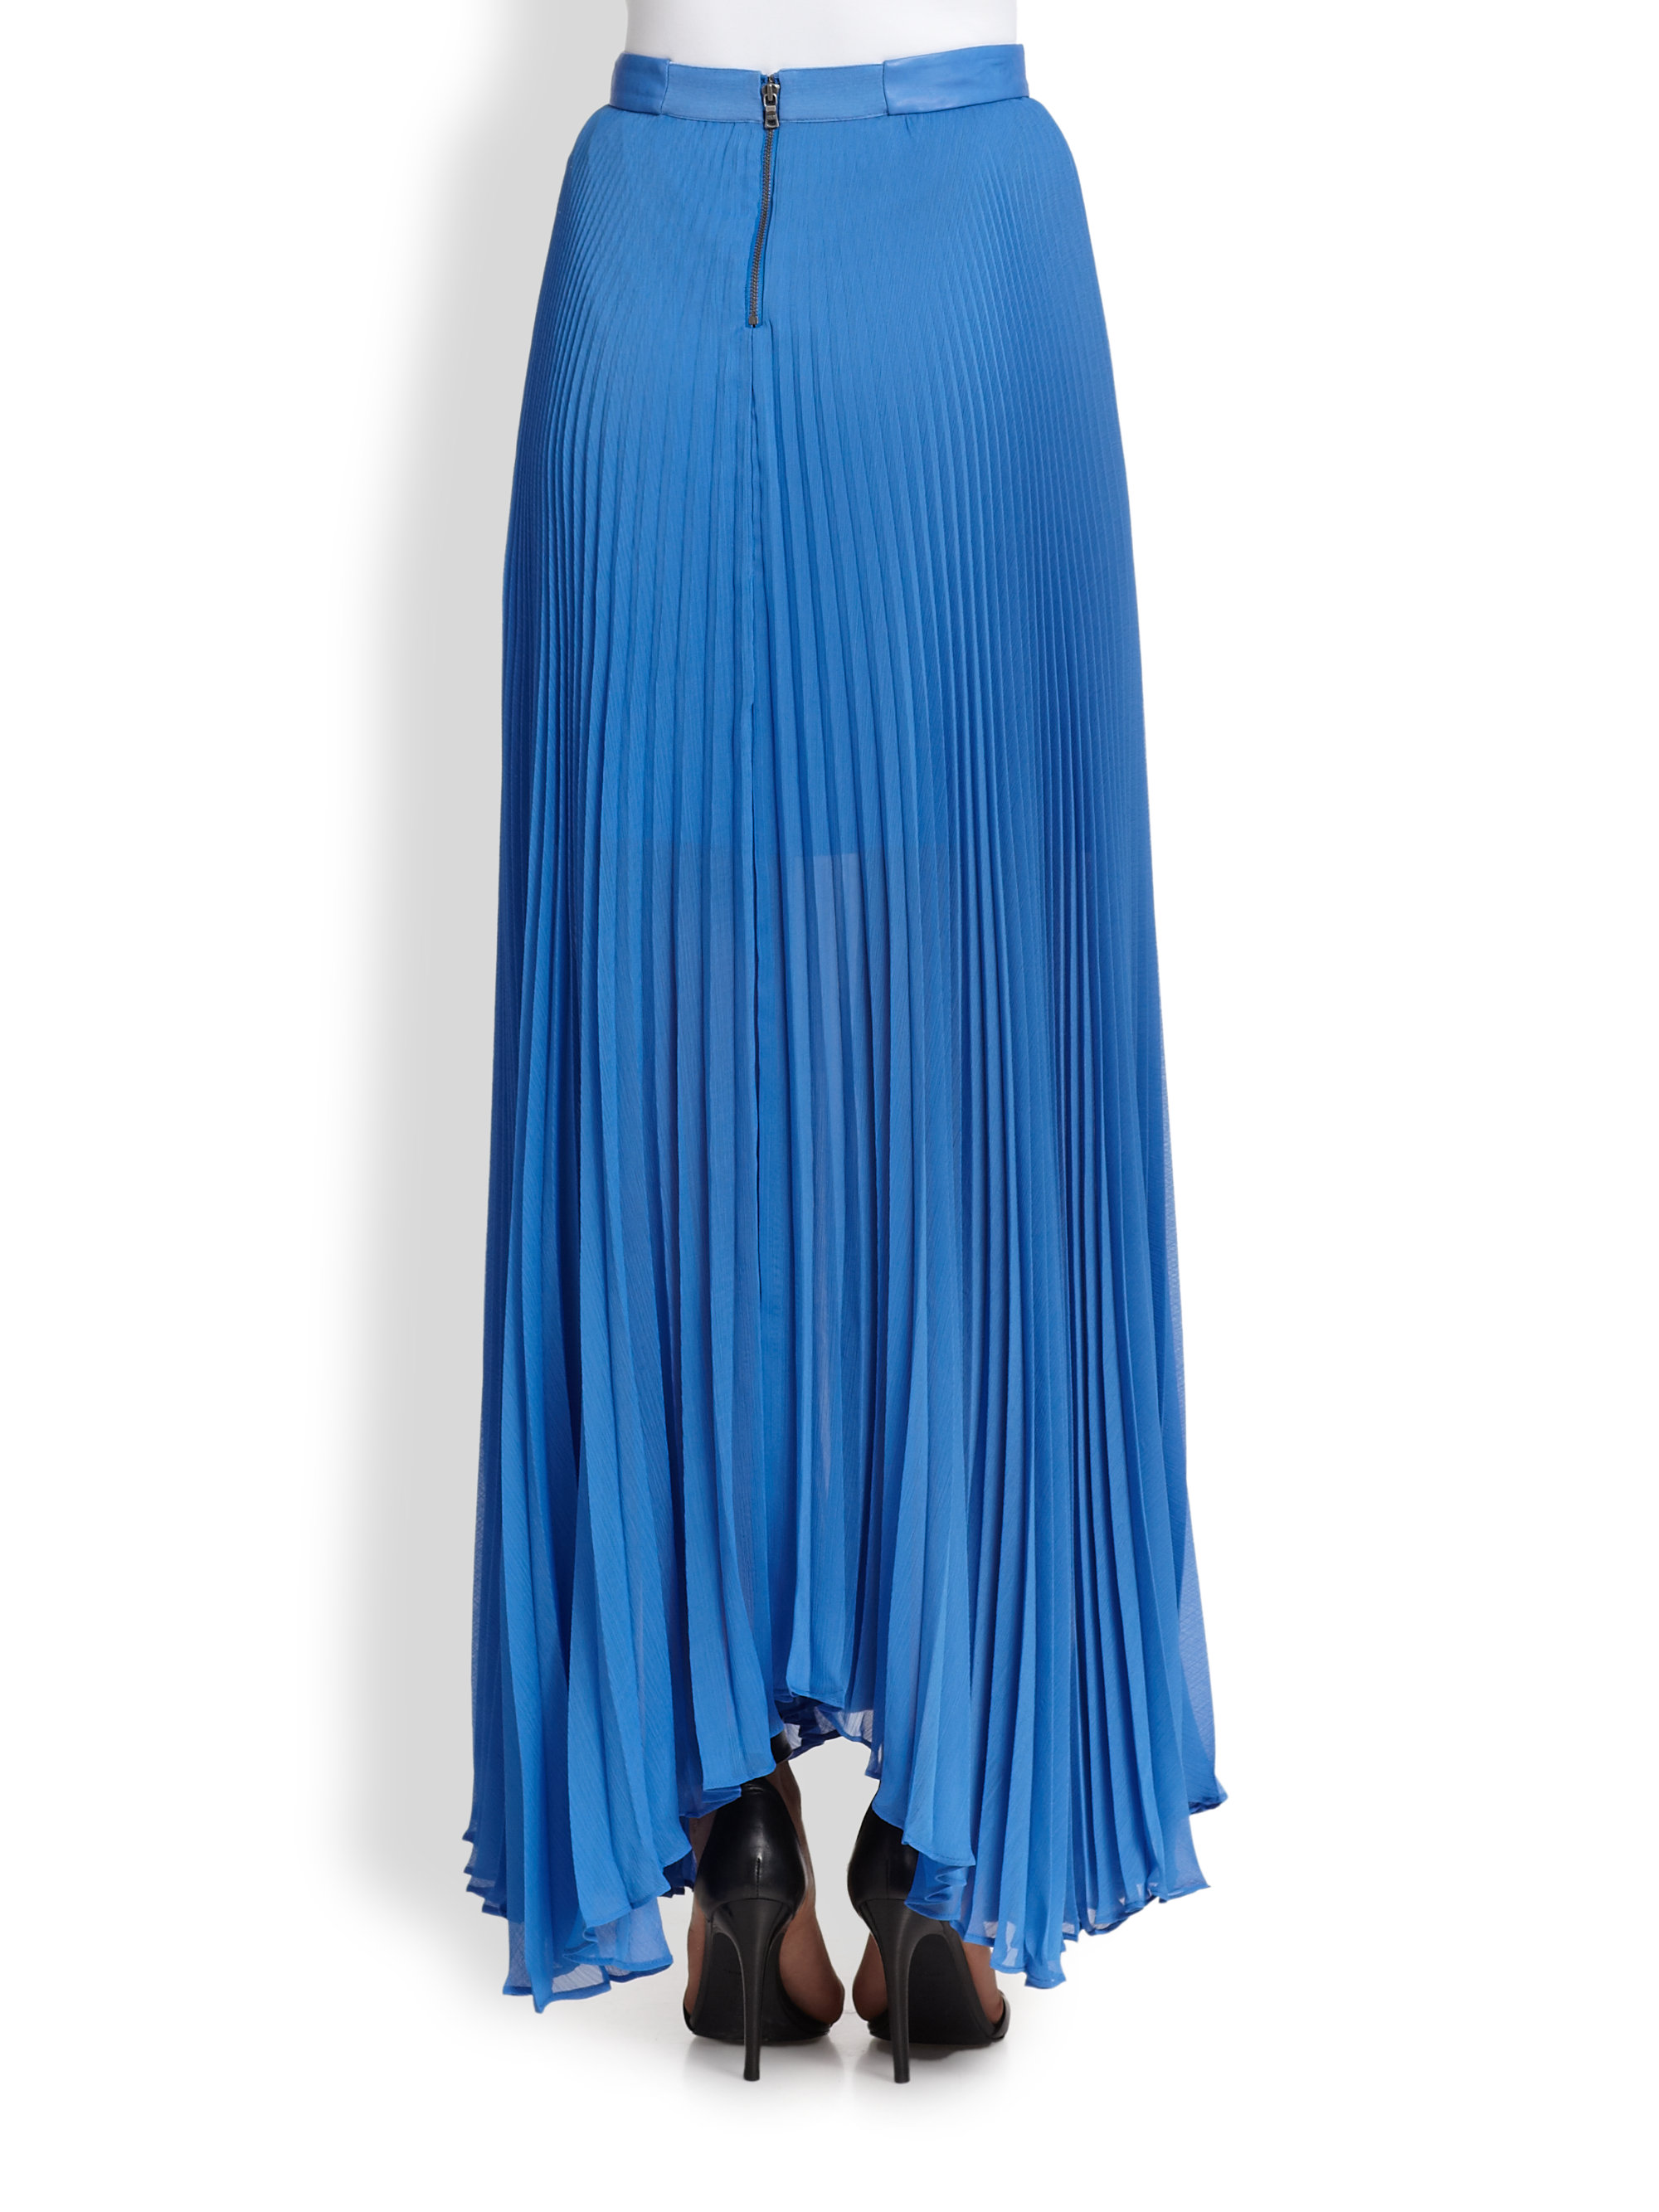 Alice + olivia Ava Leathertrimmed Pleated Maxi Skirt in Blue | Lyst